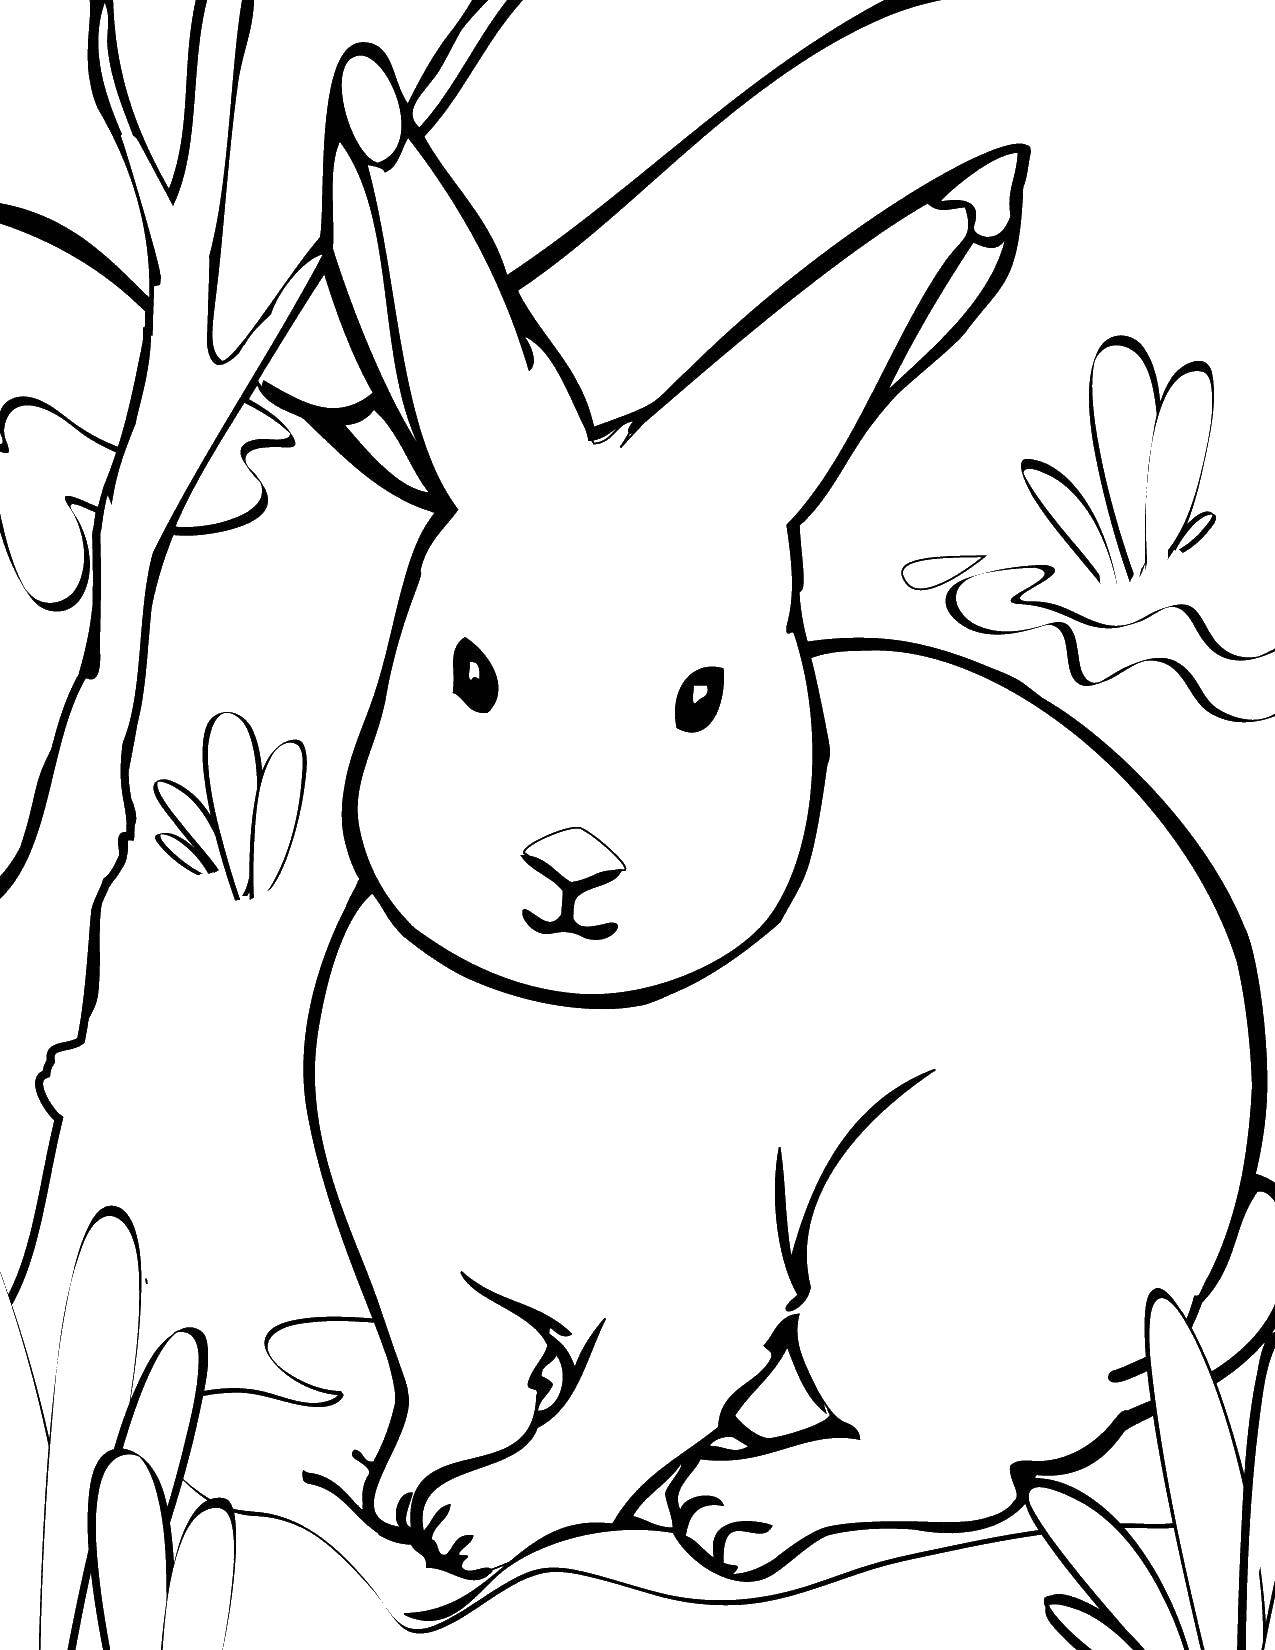 Coloring Bunny sitting in the grass. Category animals. Tags:  Animals, Bunny.